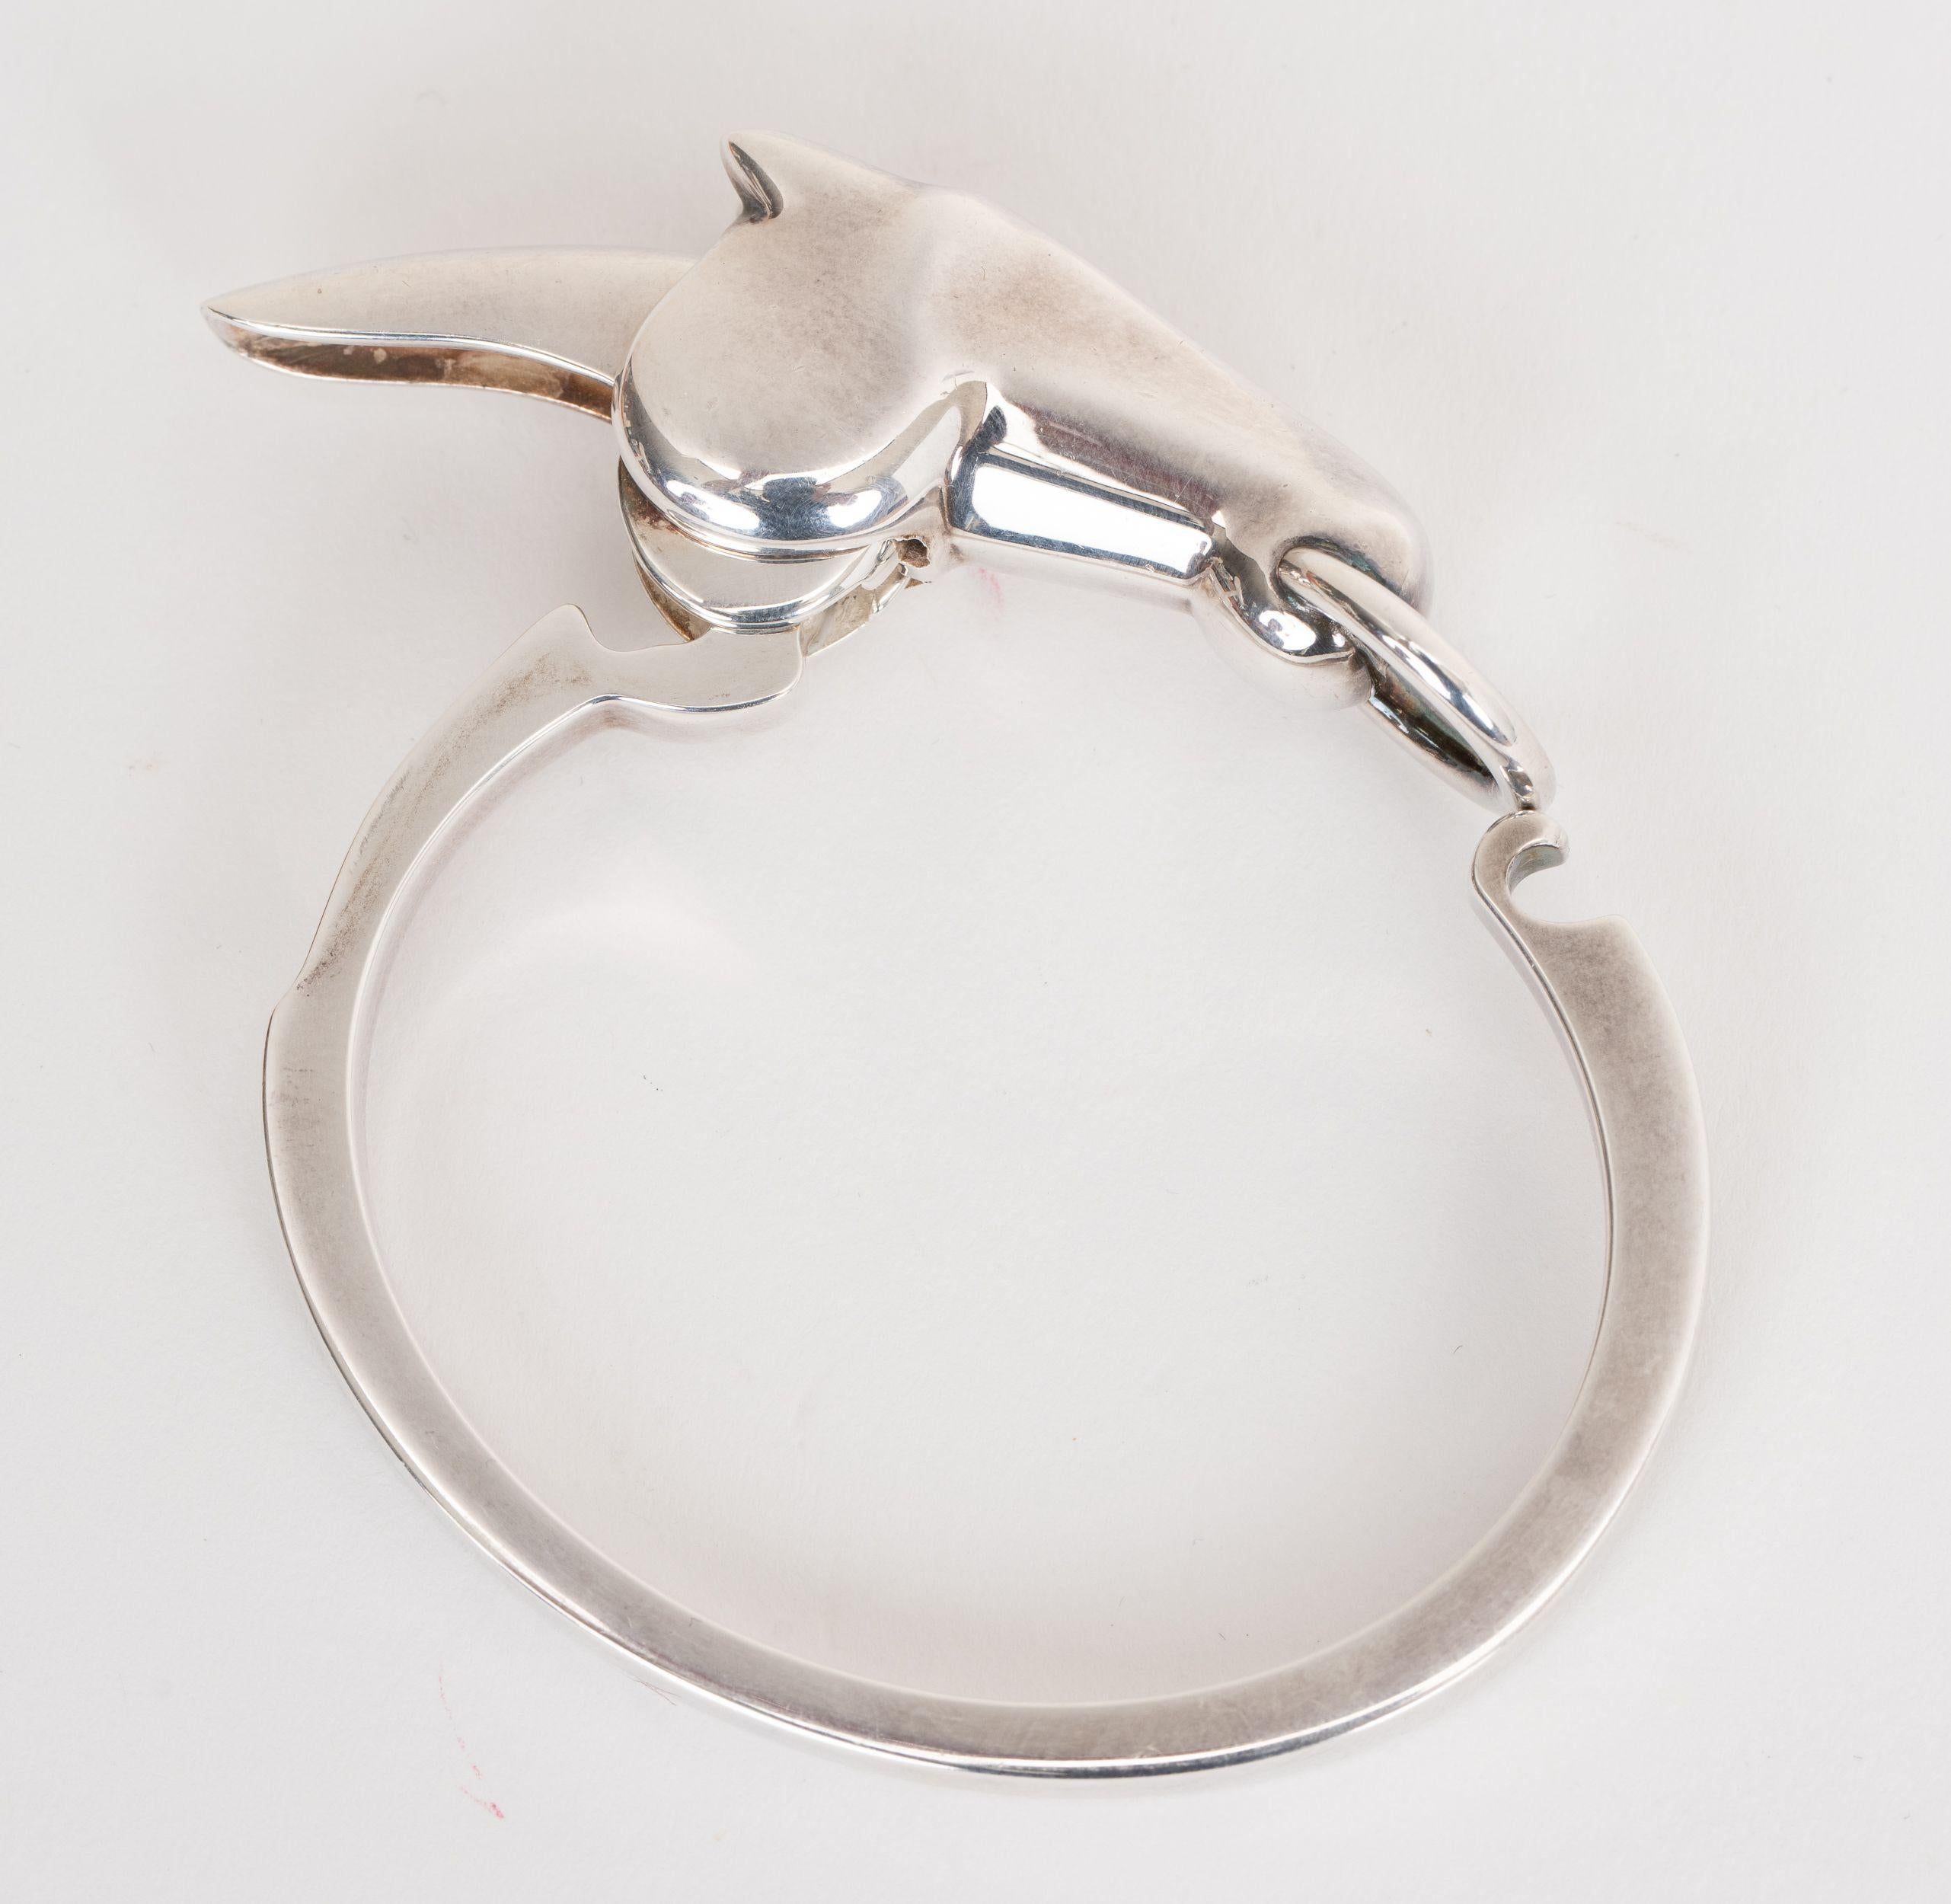 Hermes Sterling Silver Galop Bracelet features a simple silhouette along side the horse head motif in the center. Size small. Comes with original high jewelry box.